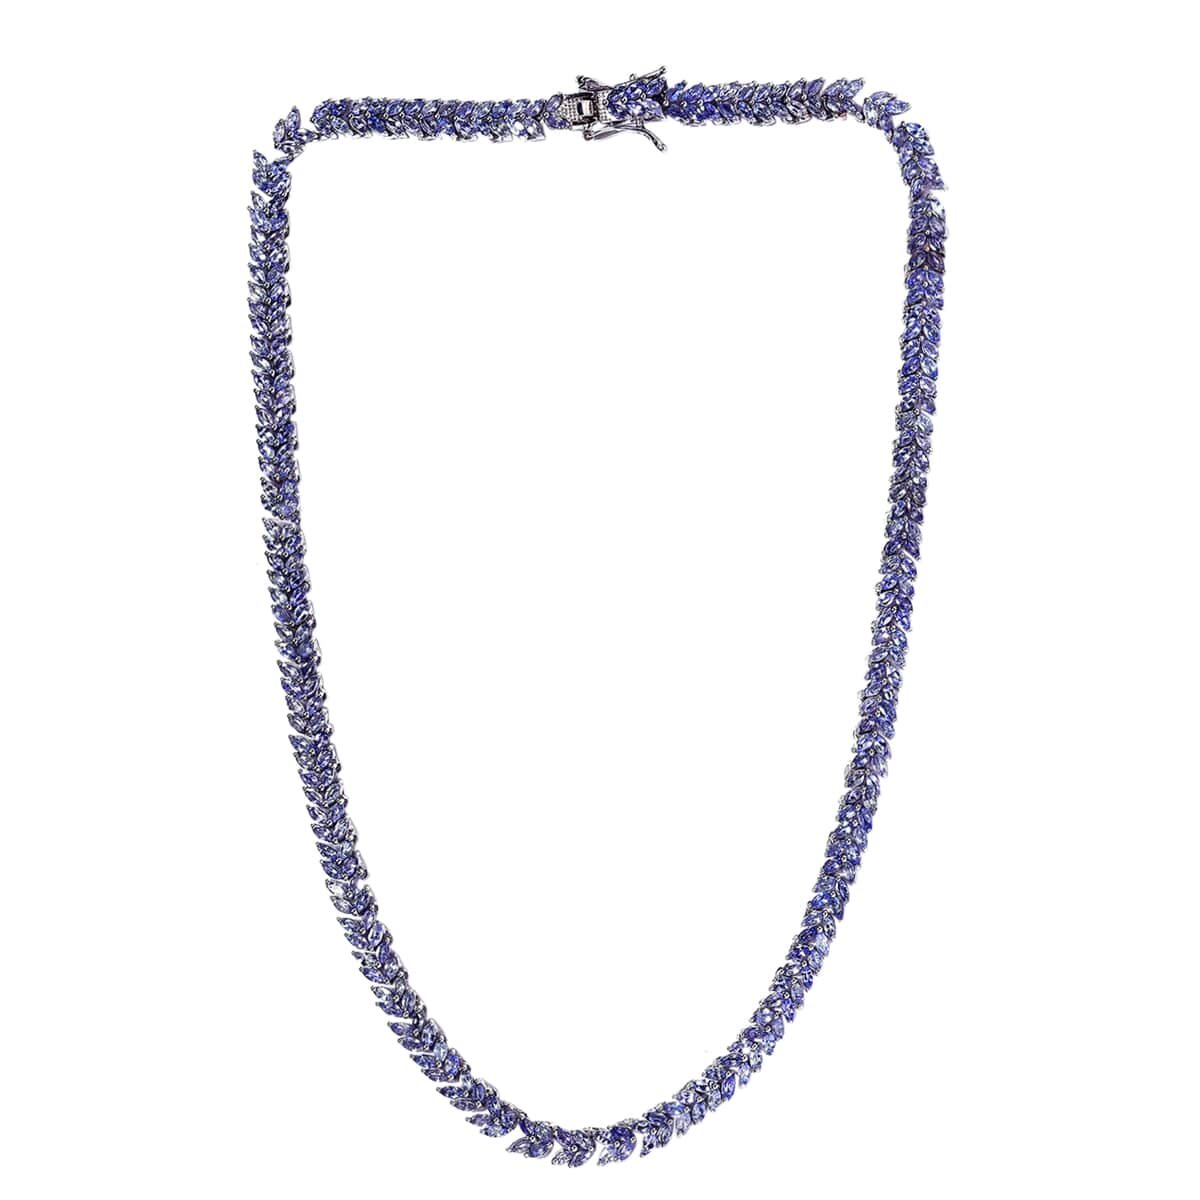 Karis Tanzanite Necklace in Platinum Bond, Double Row Necklace, Tanzanite Jewelry 20.50 ctw (18 Inches) image number 0